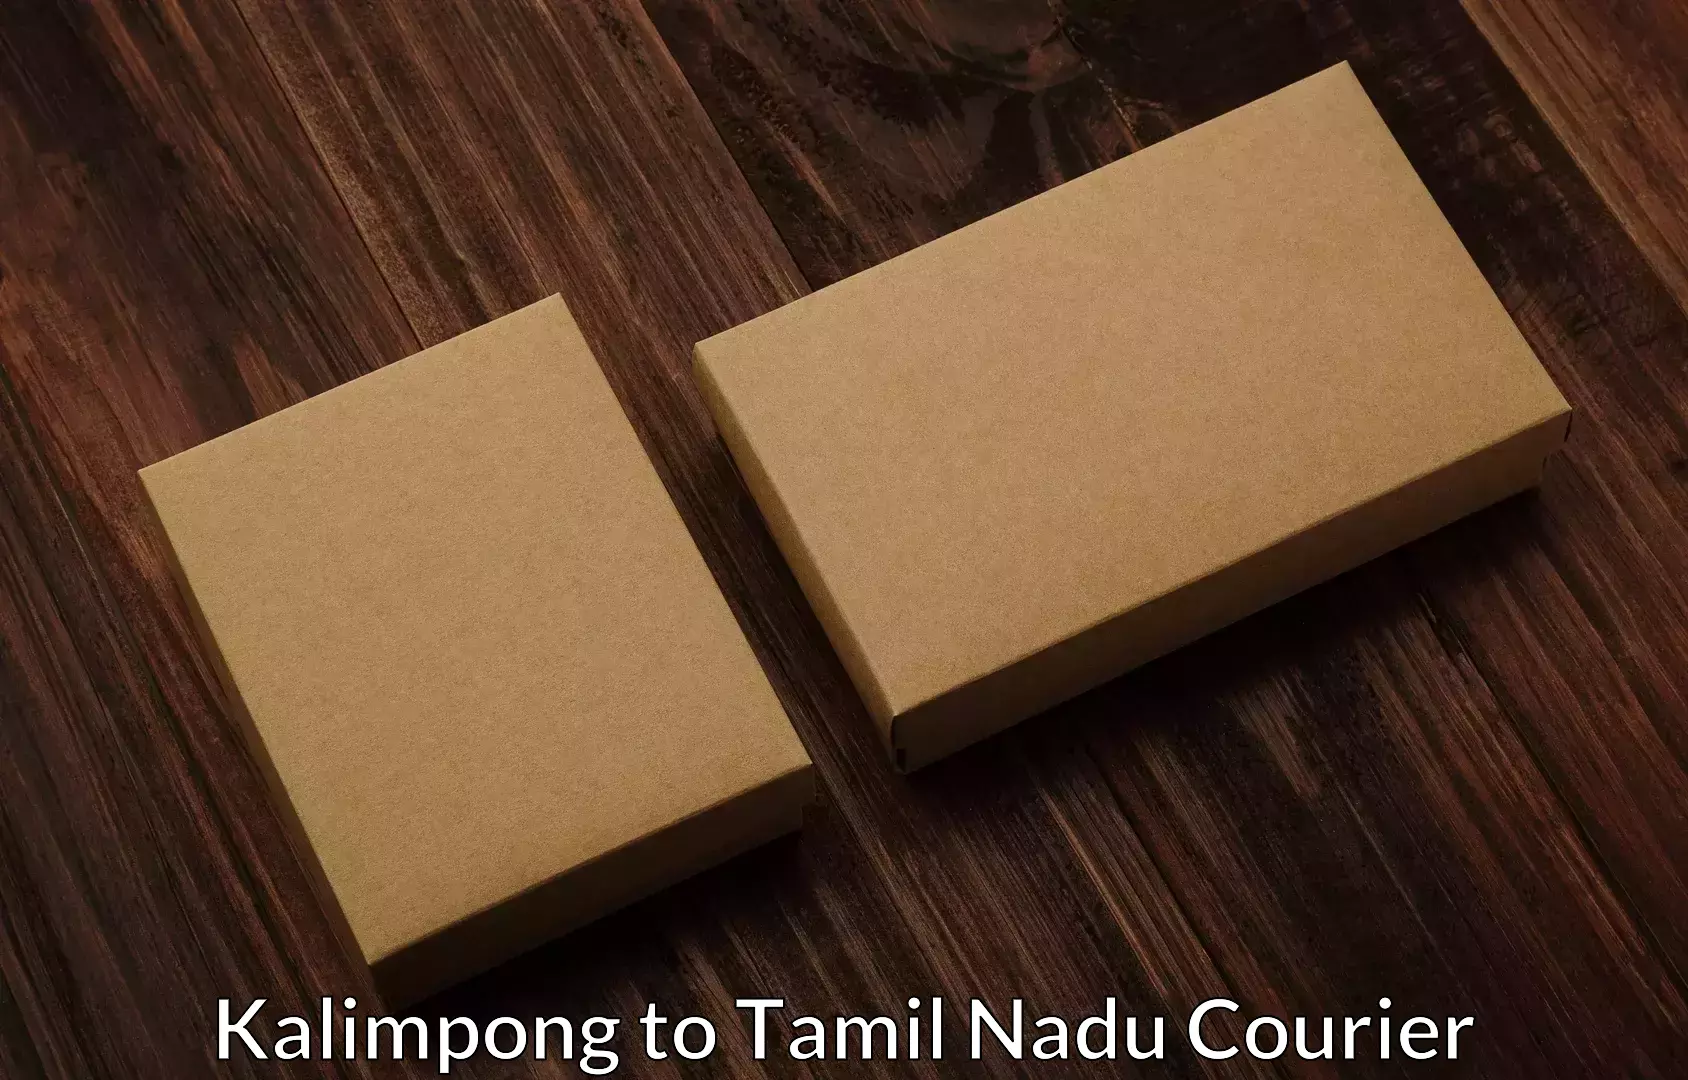 Furniture delivery service Kalimpong to Ennore Port Chennai